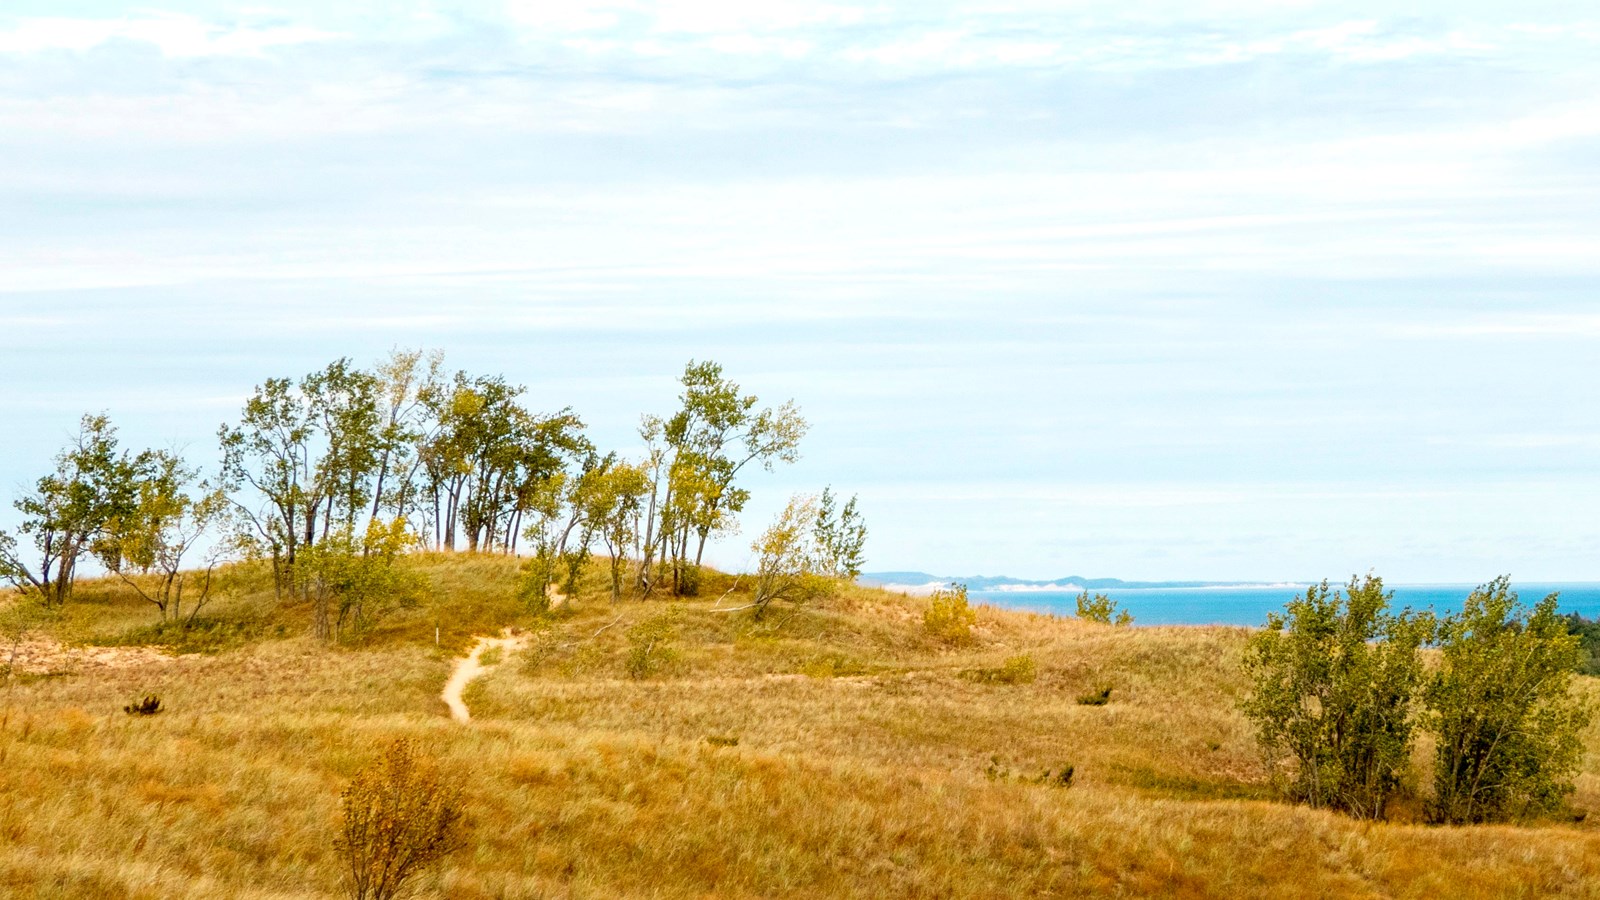 Thin trail on a yellow-vegetated dune winds towards a grove of small trees and a blue lake